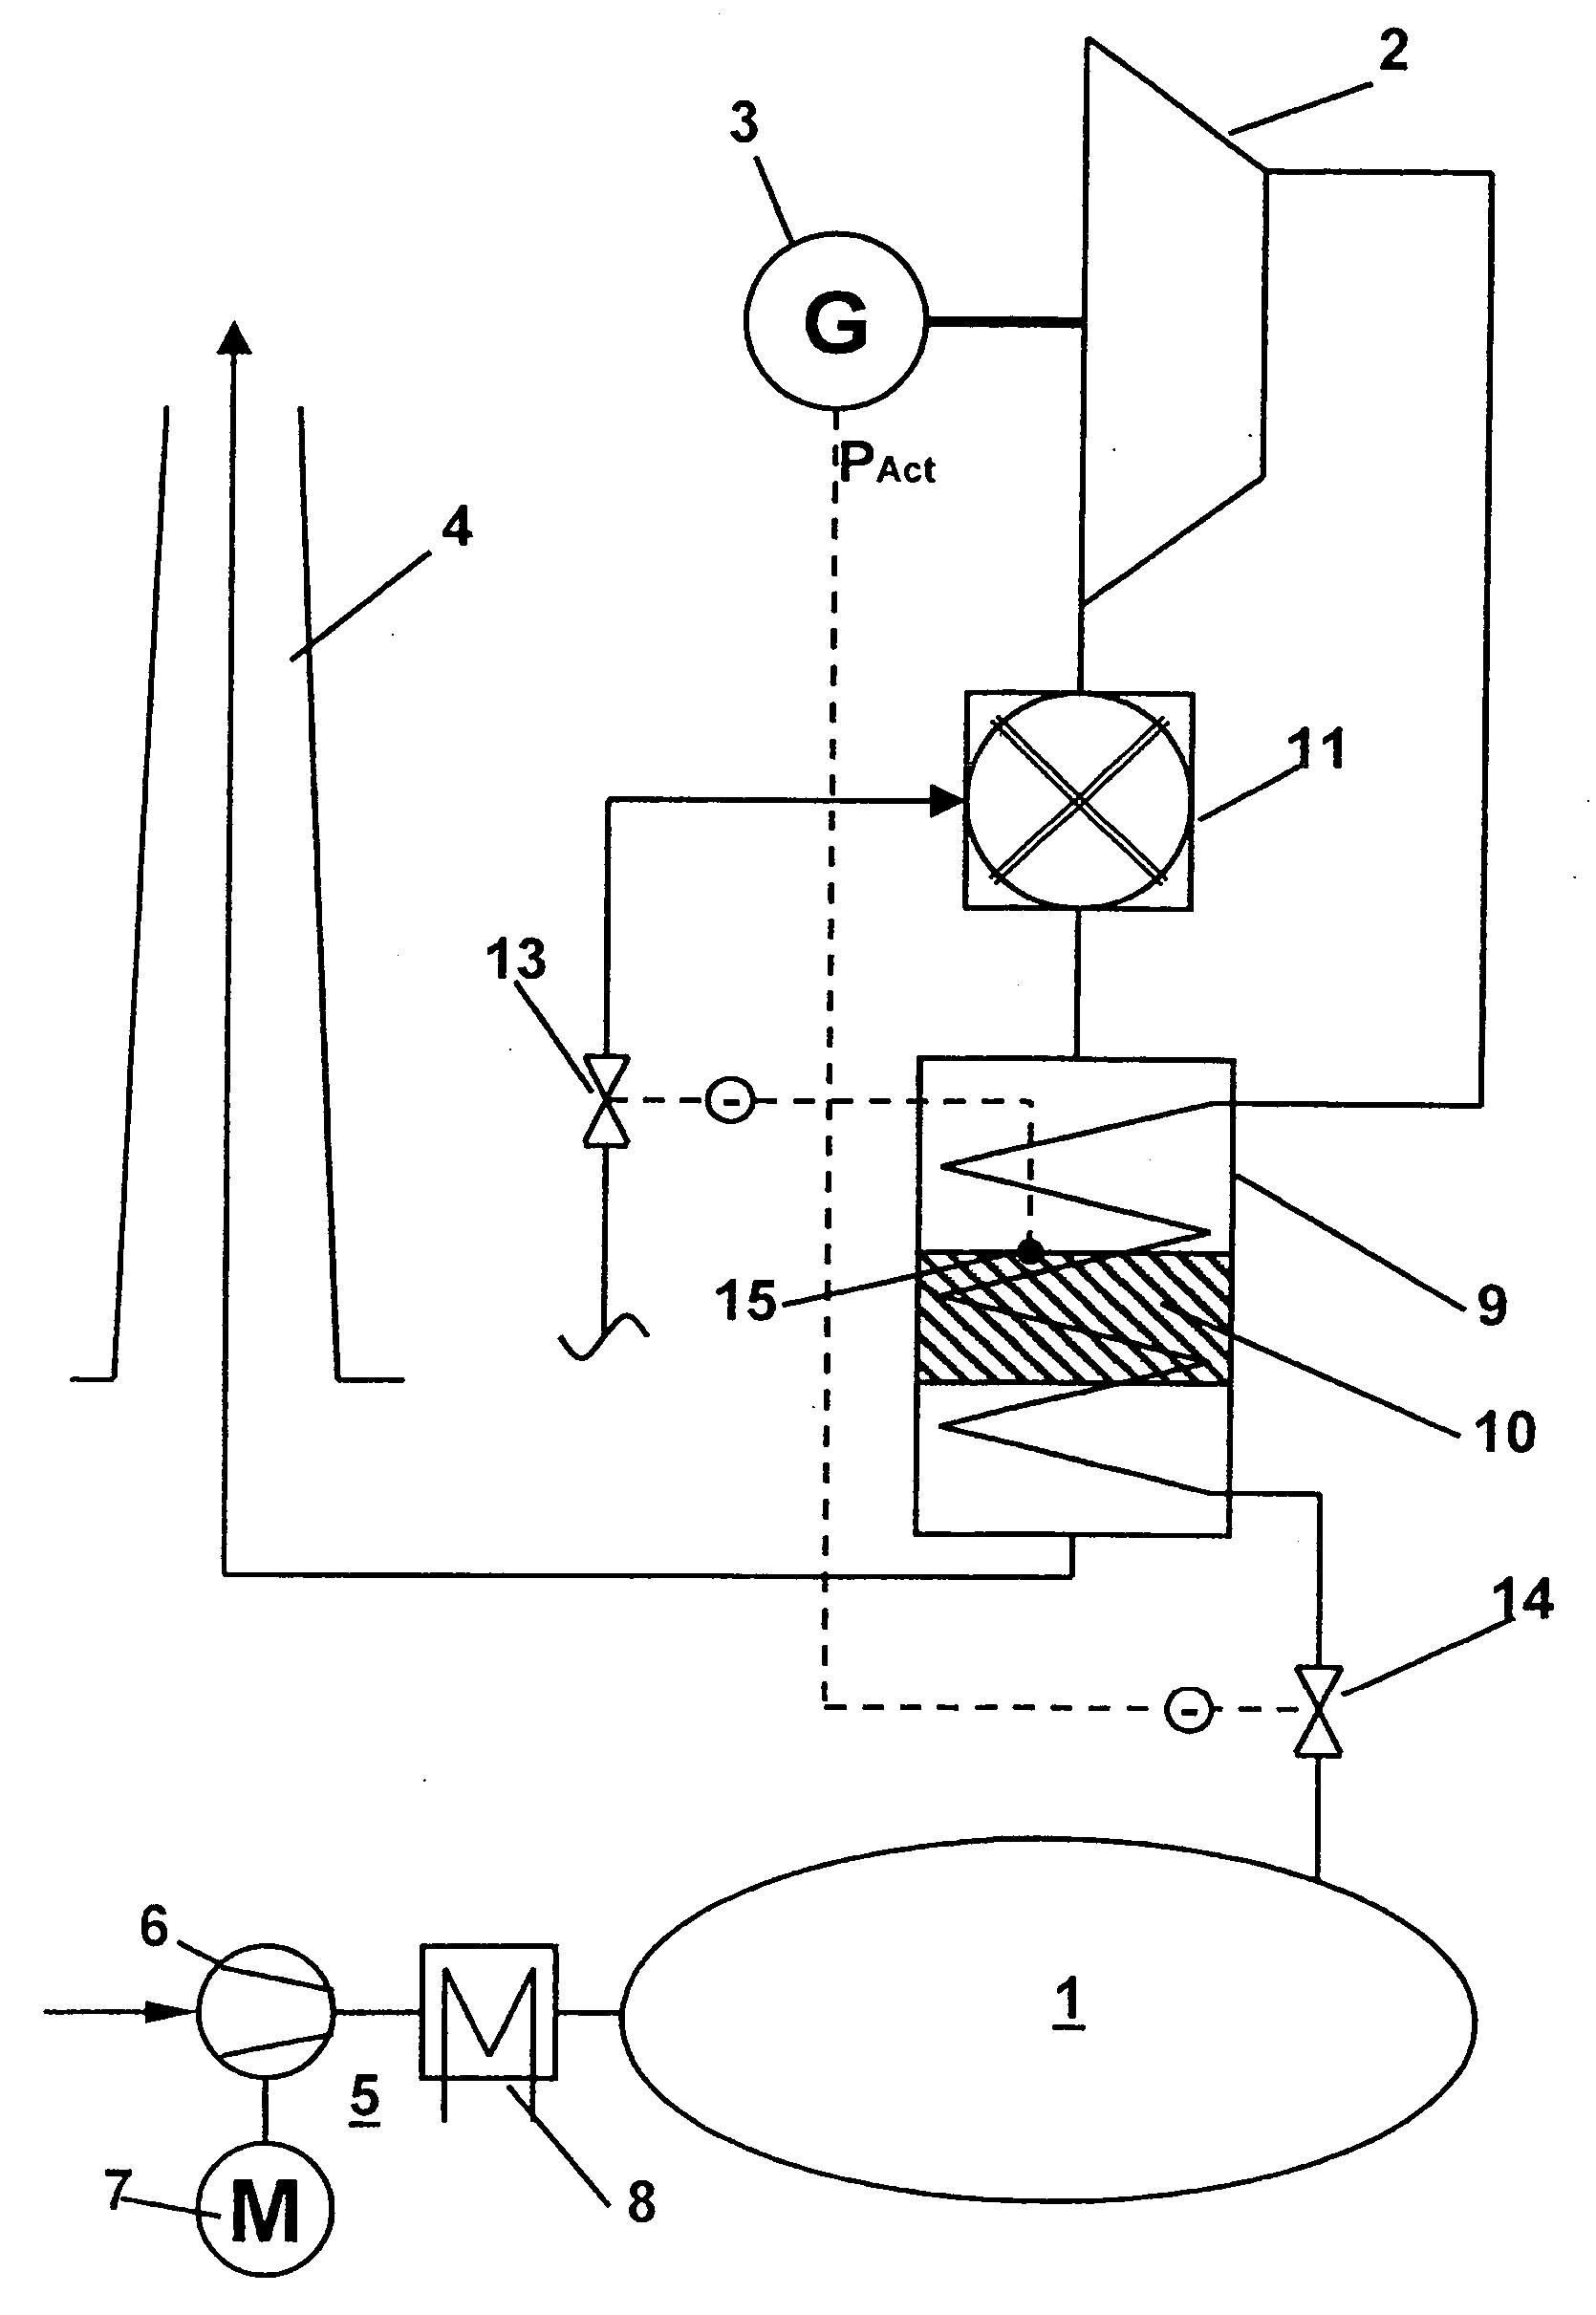 Method for operation of a power generation plant